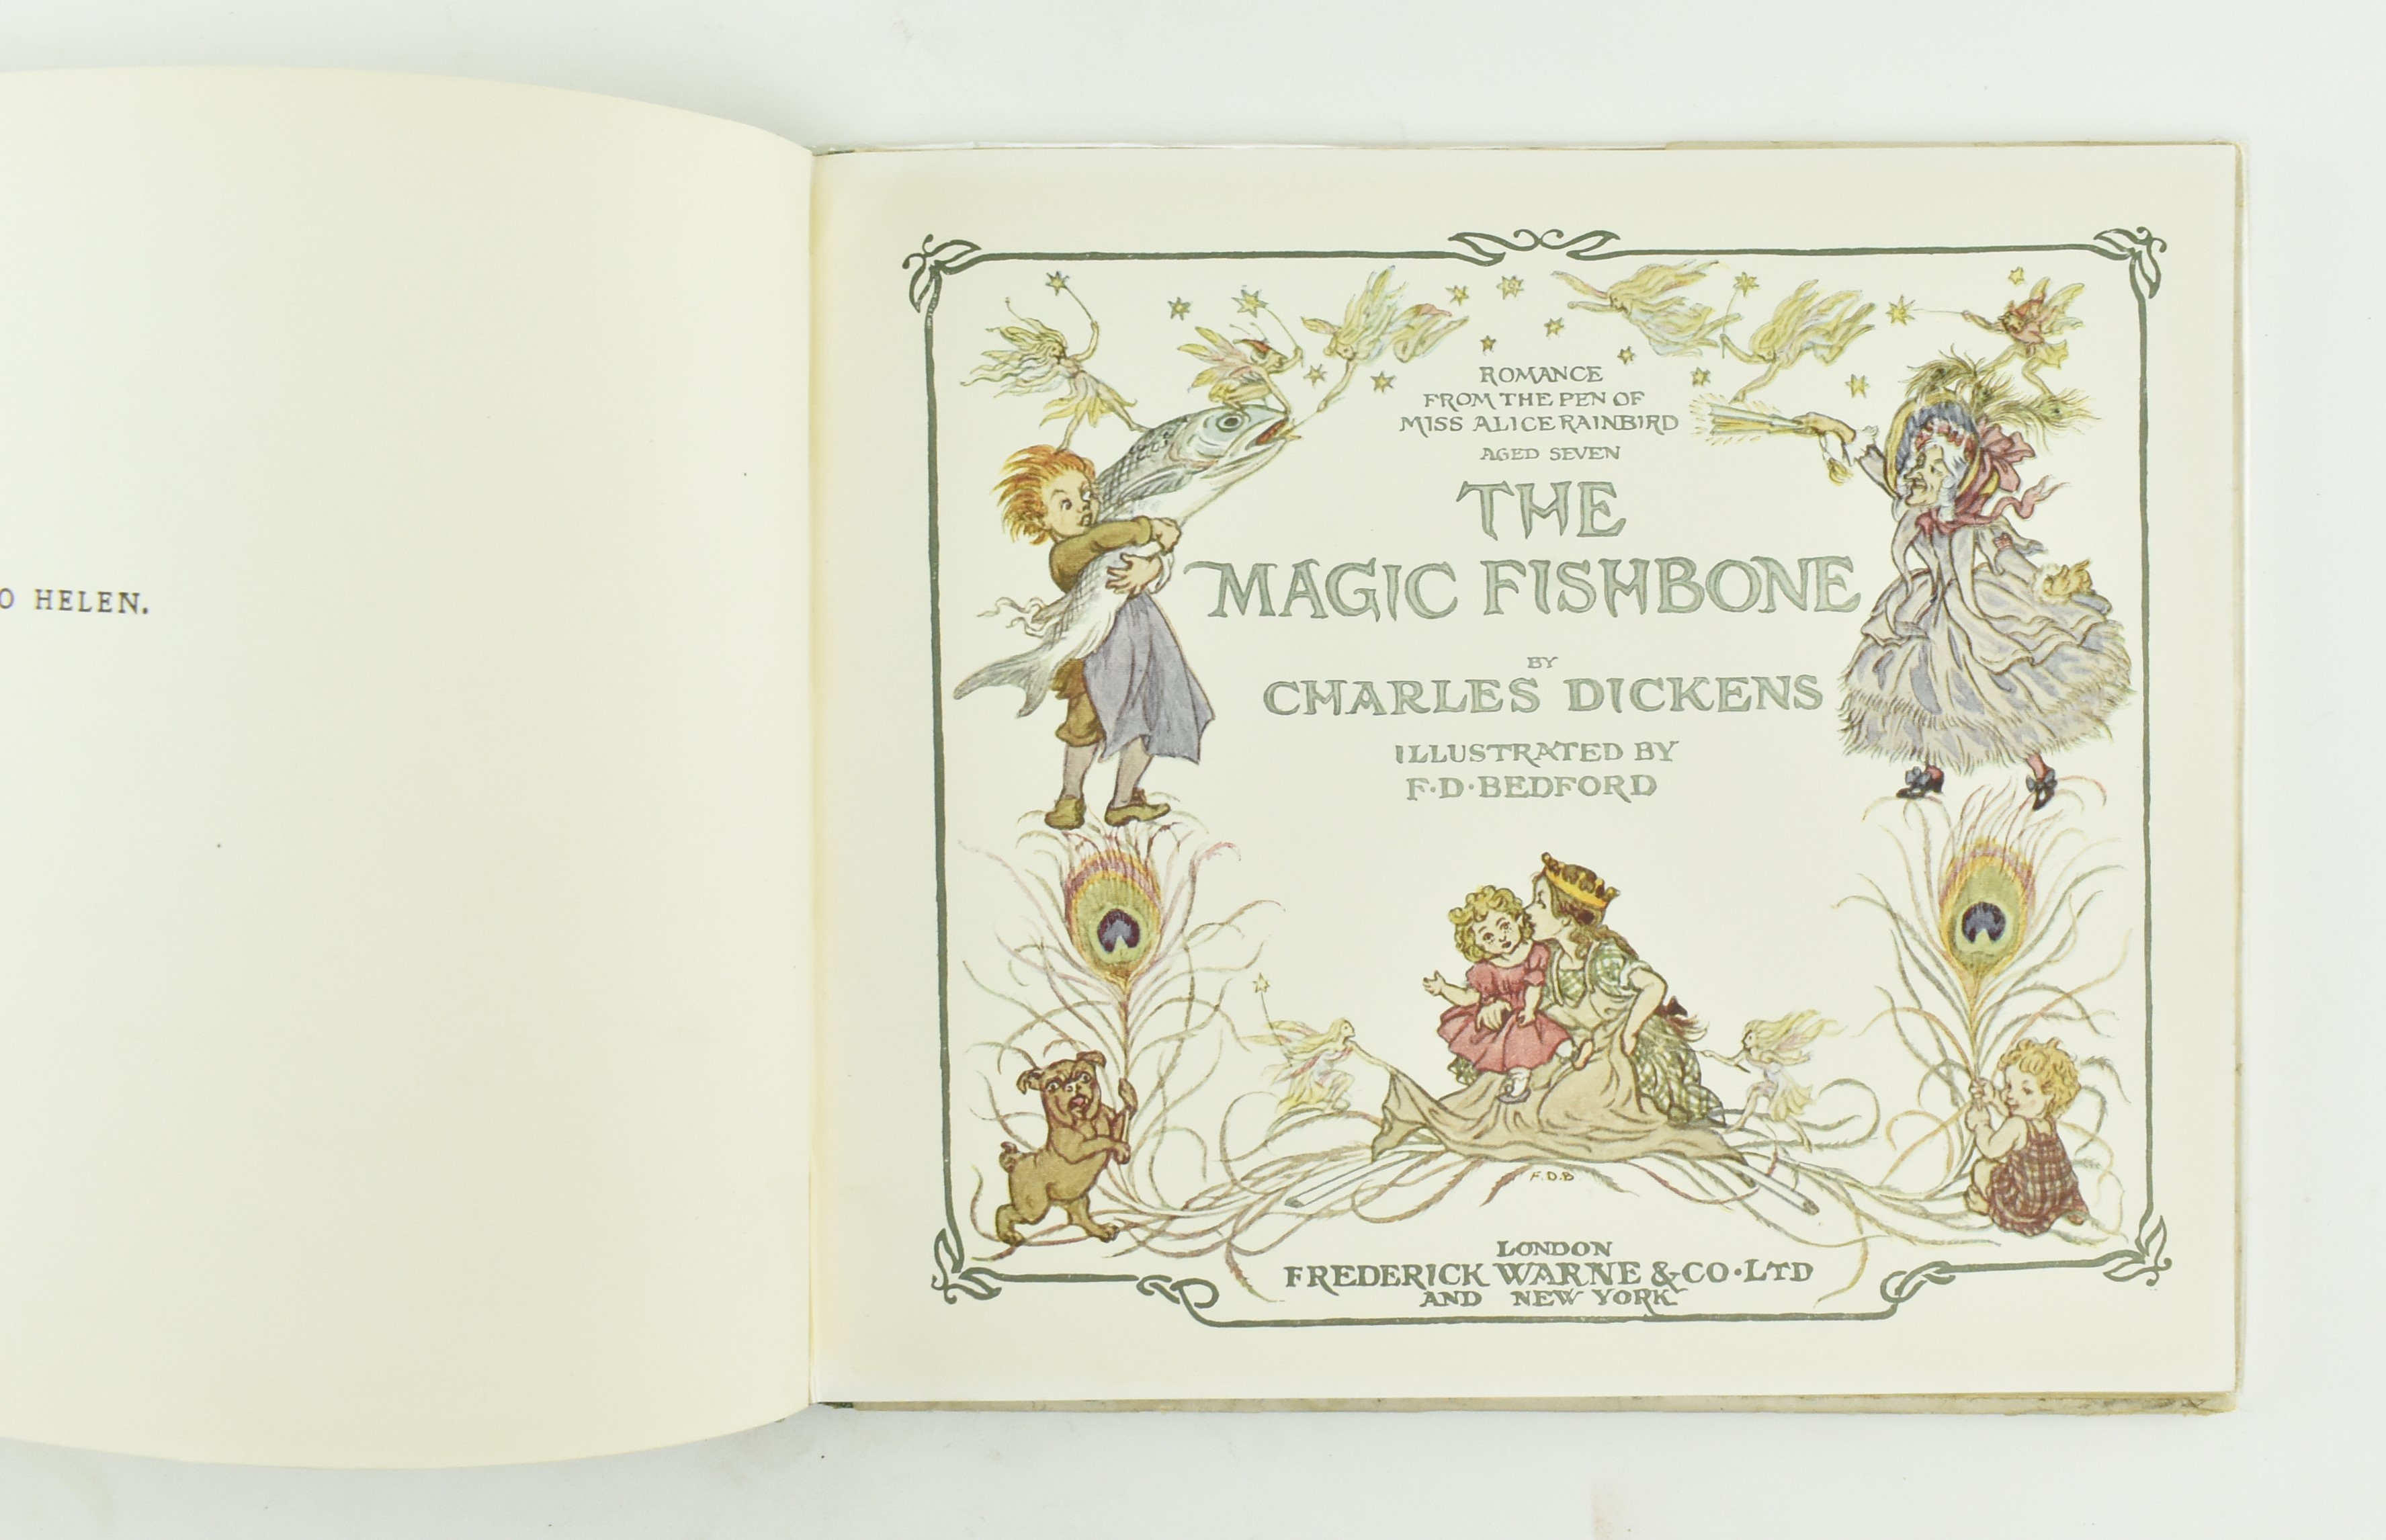 EDWARDIAN CHILDREN'S ILLUSTRATED BOOK. COLLECTION OF 5 WORKS - Image 9 of 10